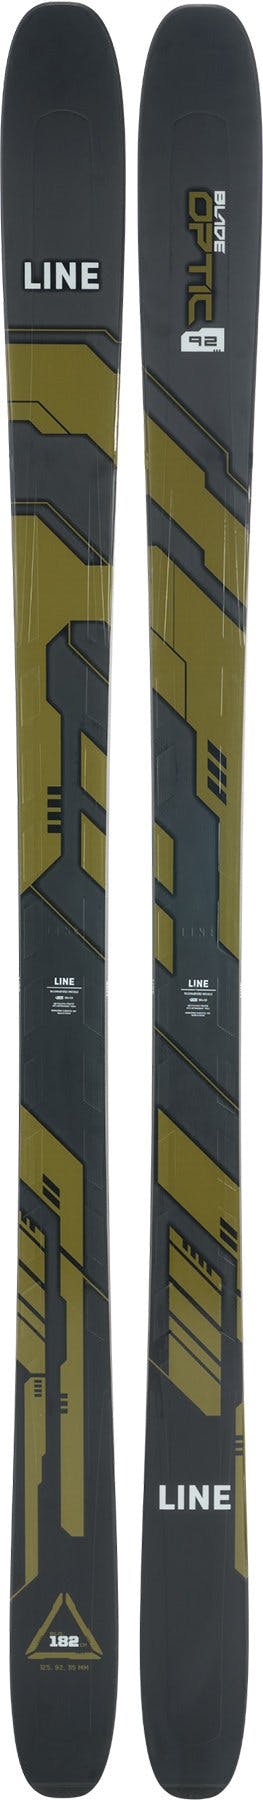 Product image for Blade Optic 92 Skis - Men's